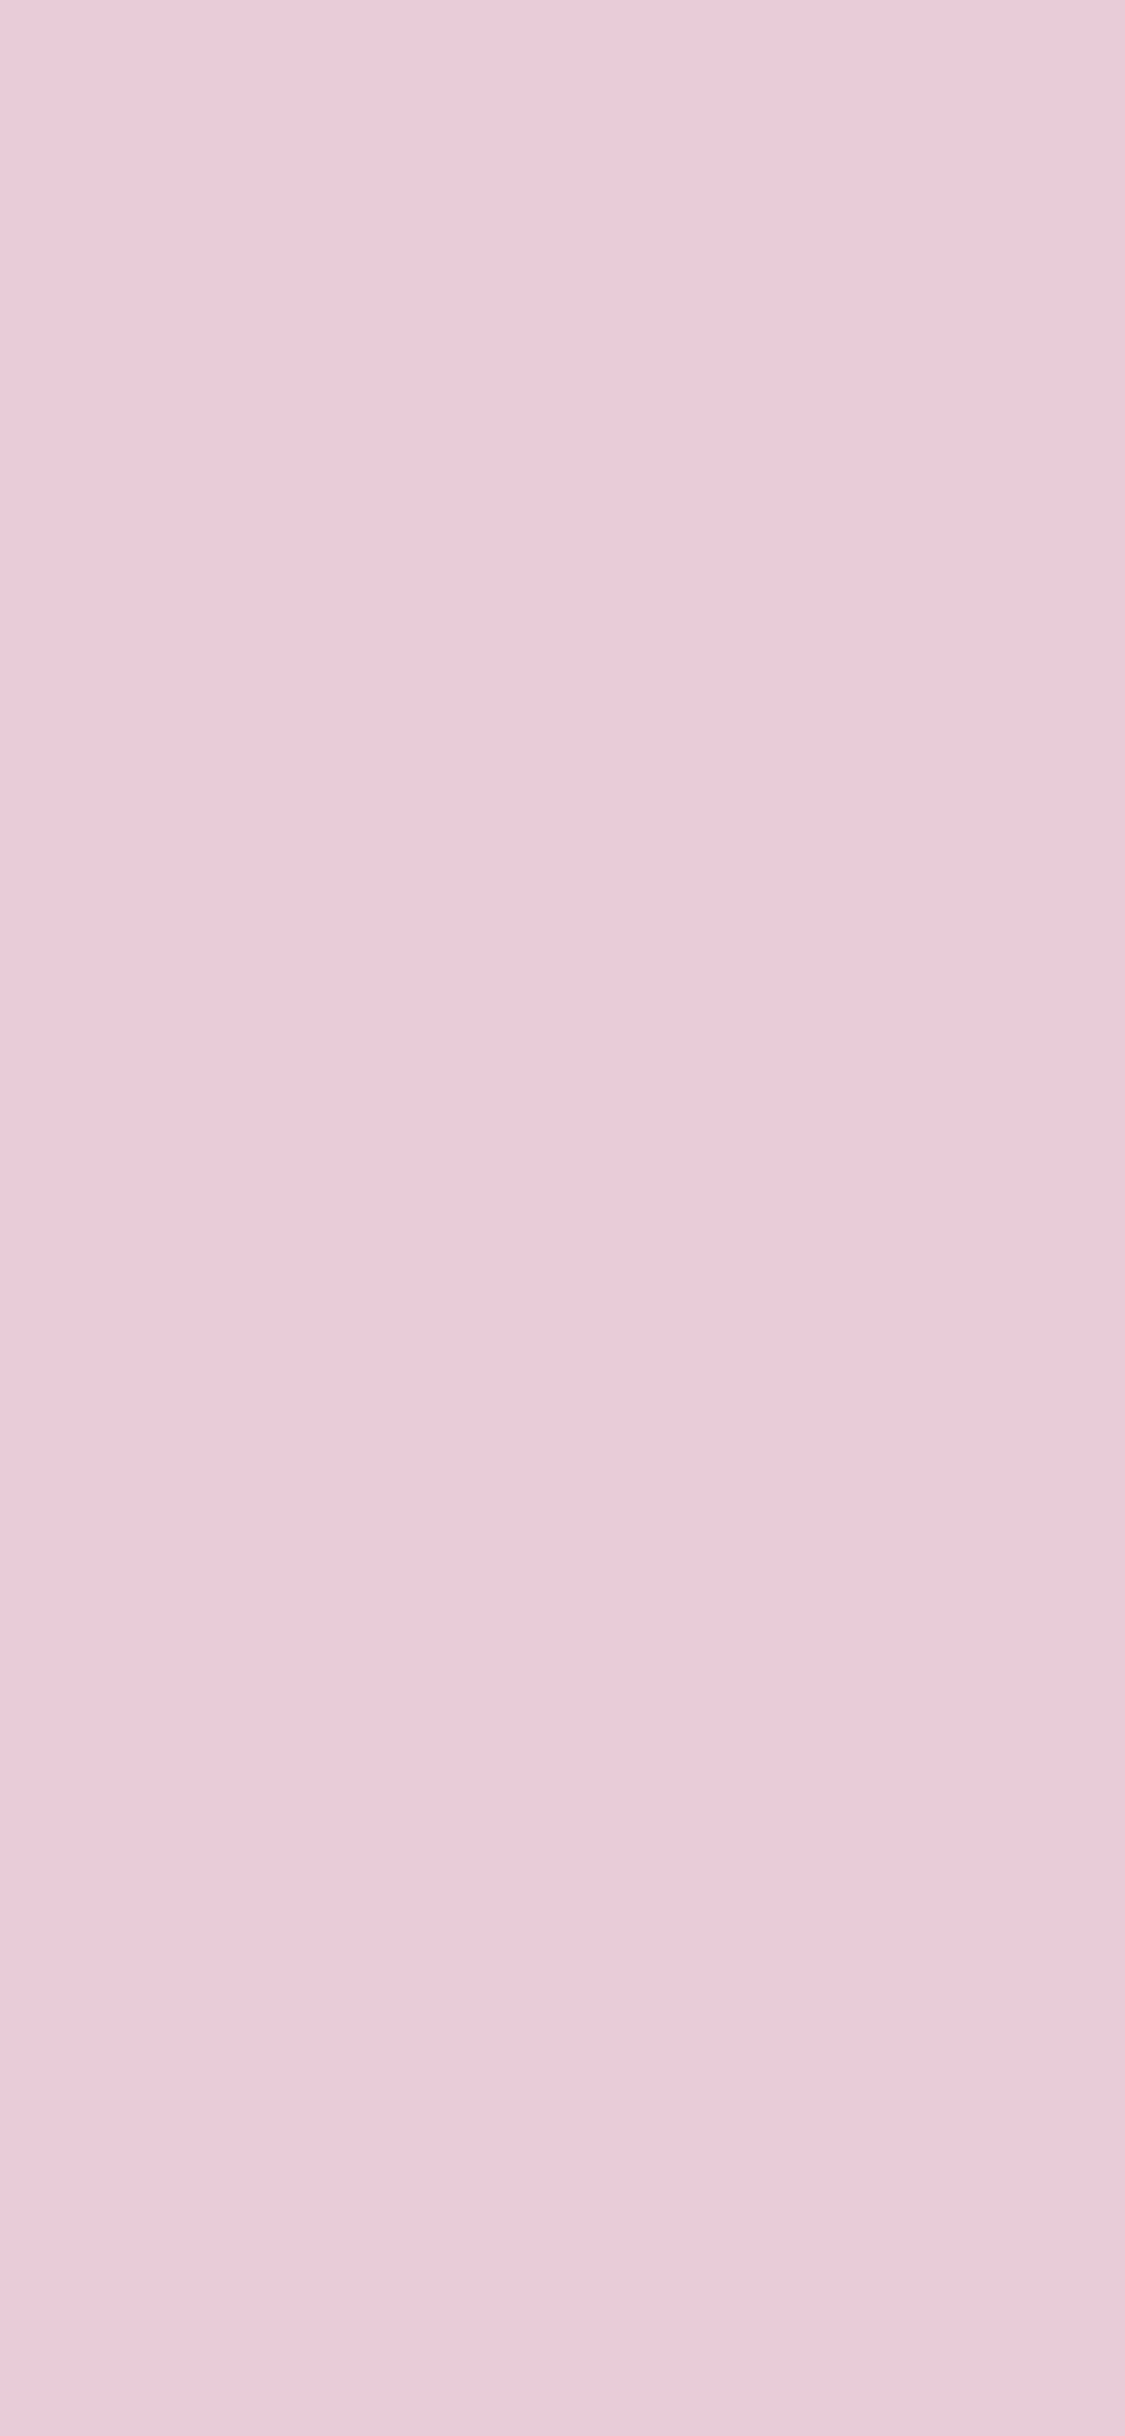 1125x2436 Queen Pink Solid Color Background